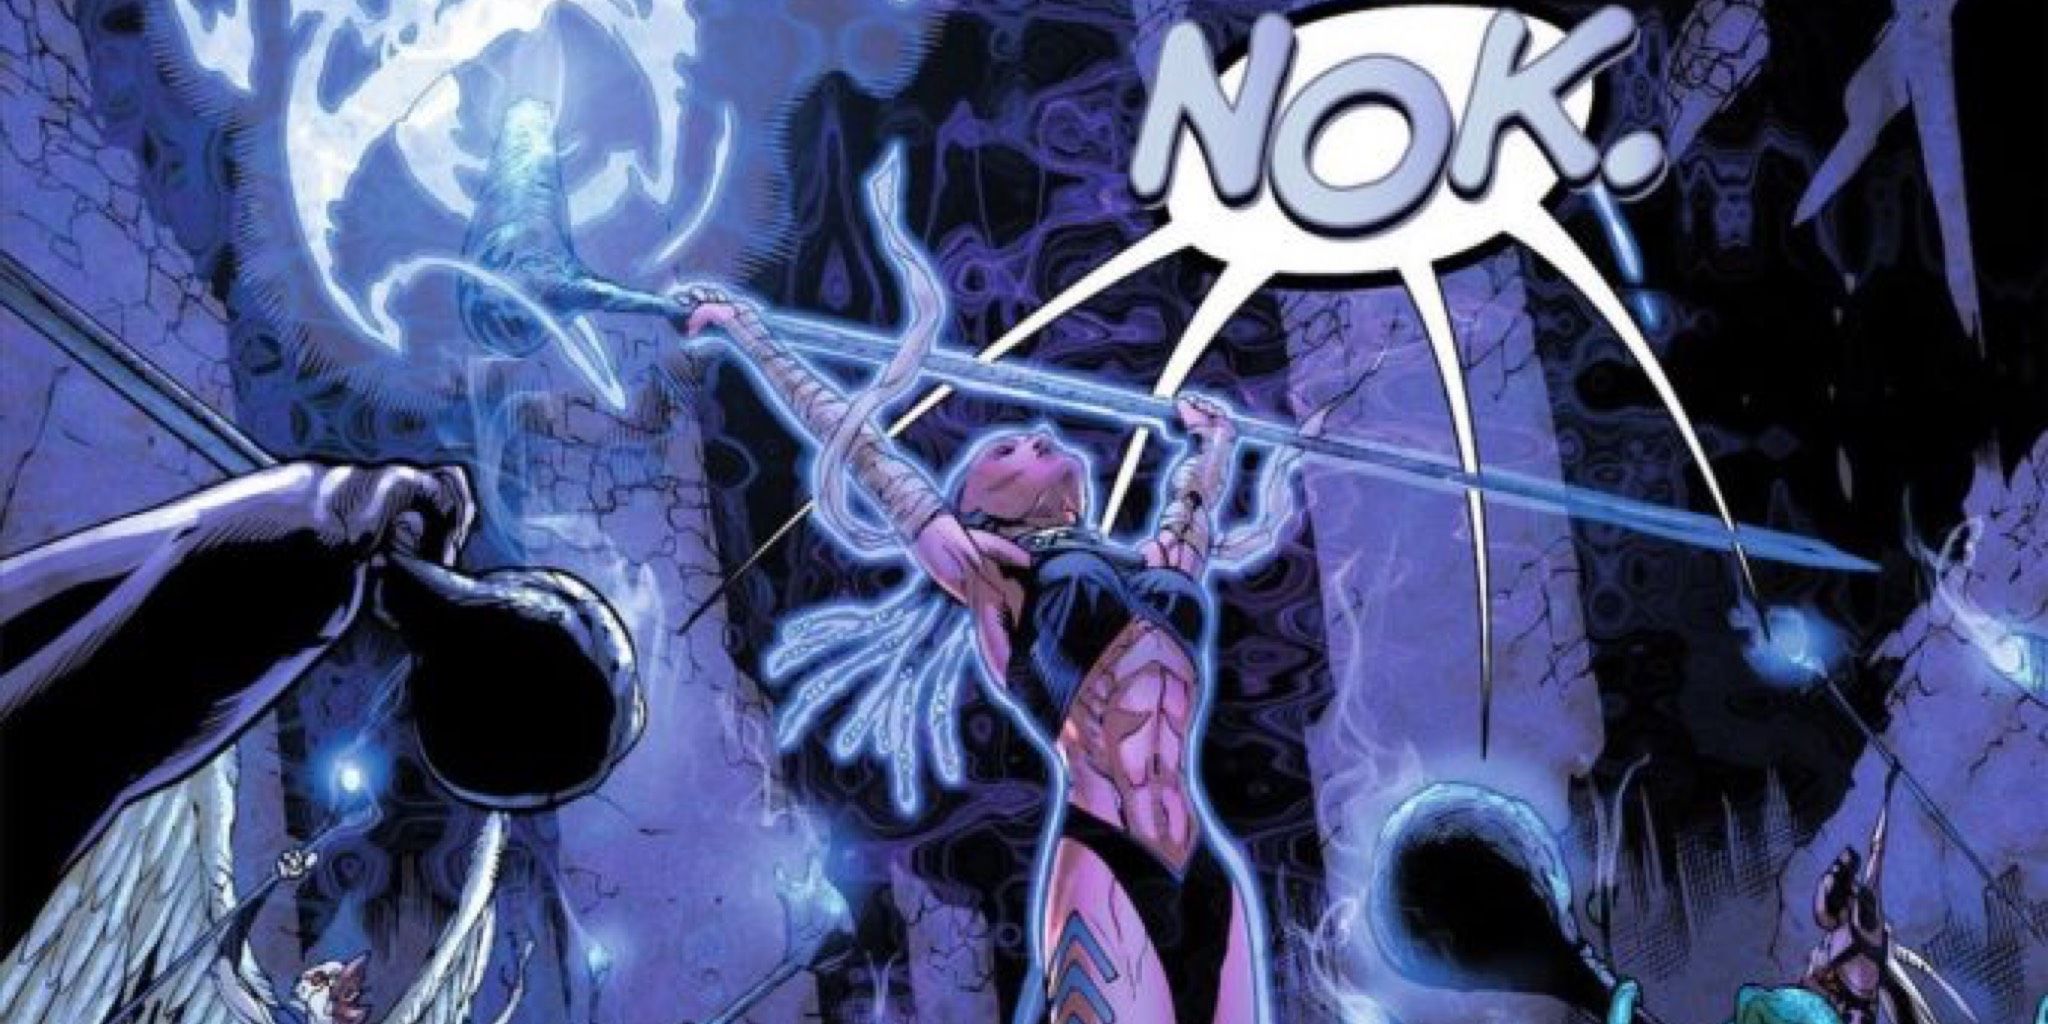 An image of the Indigo Tribe gathering together and chanting "Nok" in DC Comics